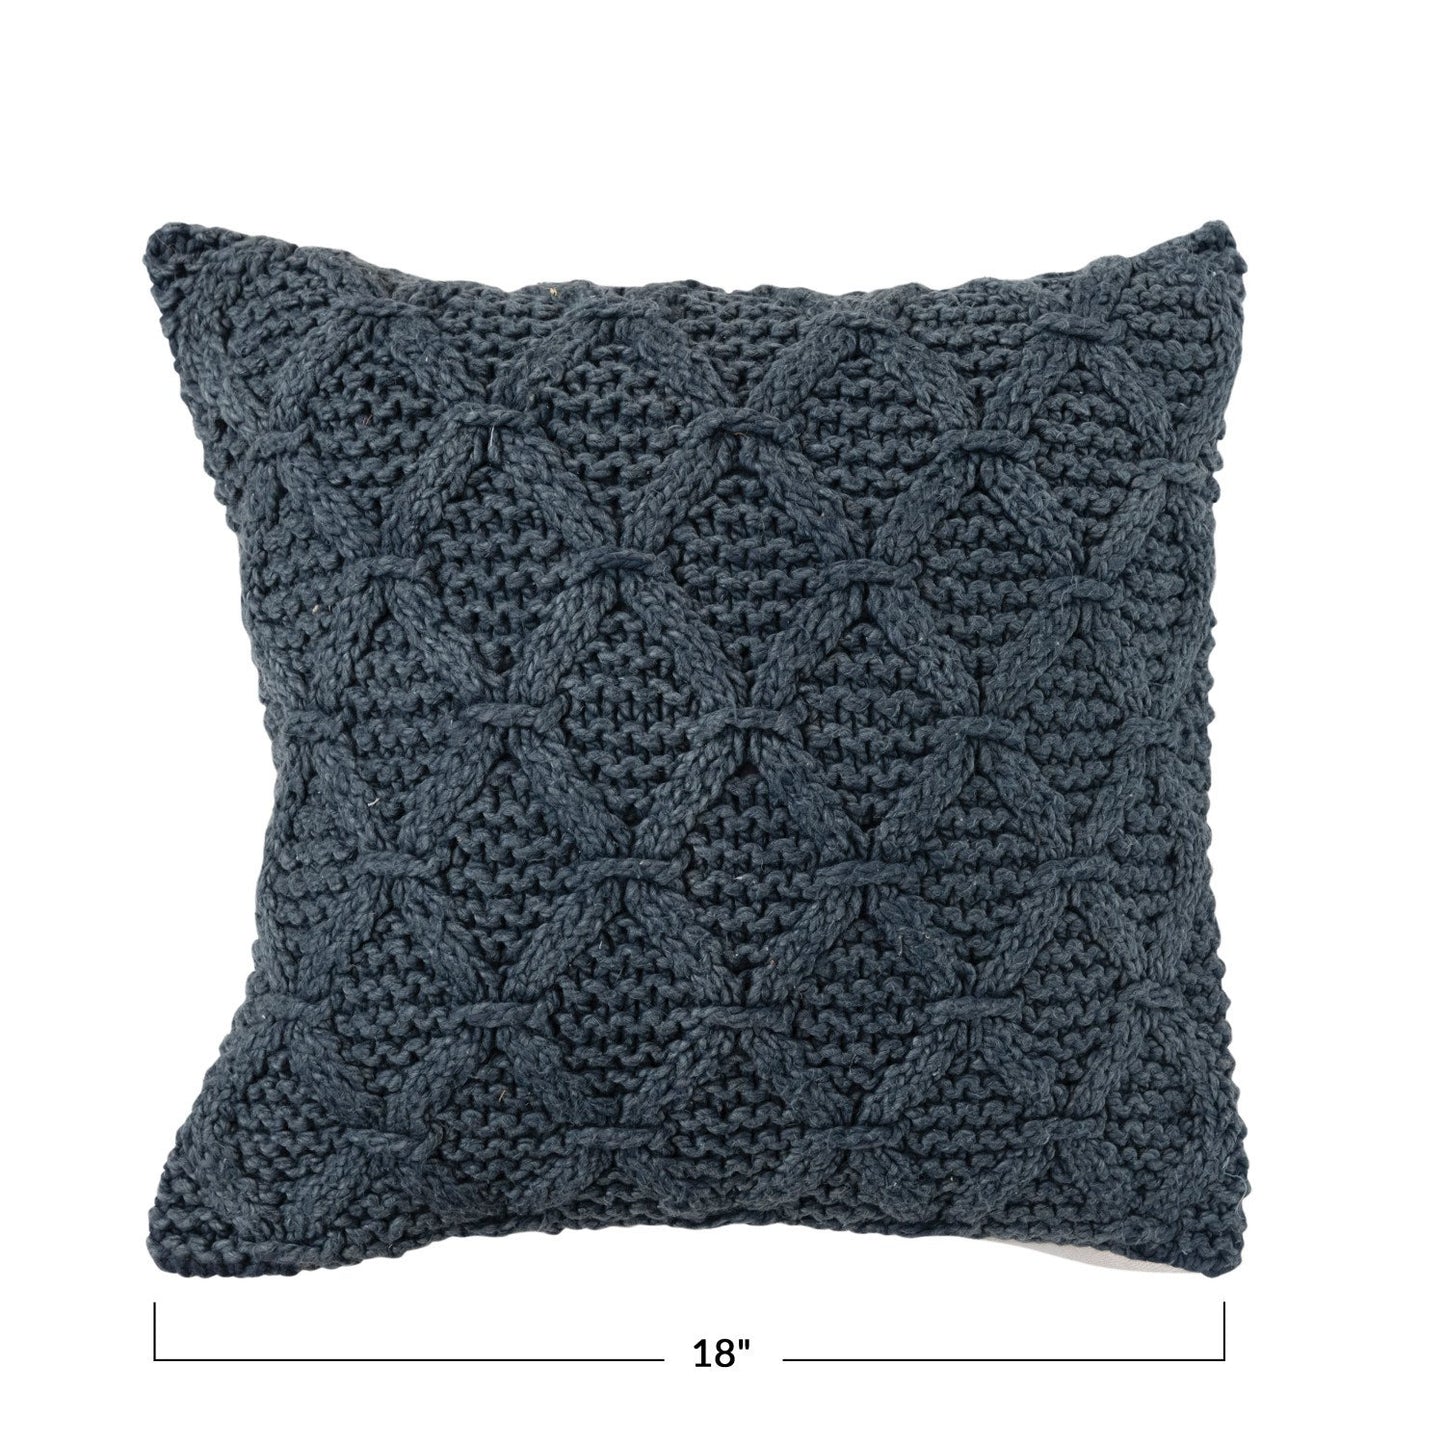 Woven Cotton Cable Knit Pillow w/ Pattern, Polyester Fill